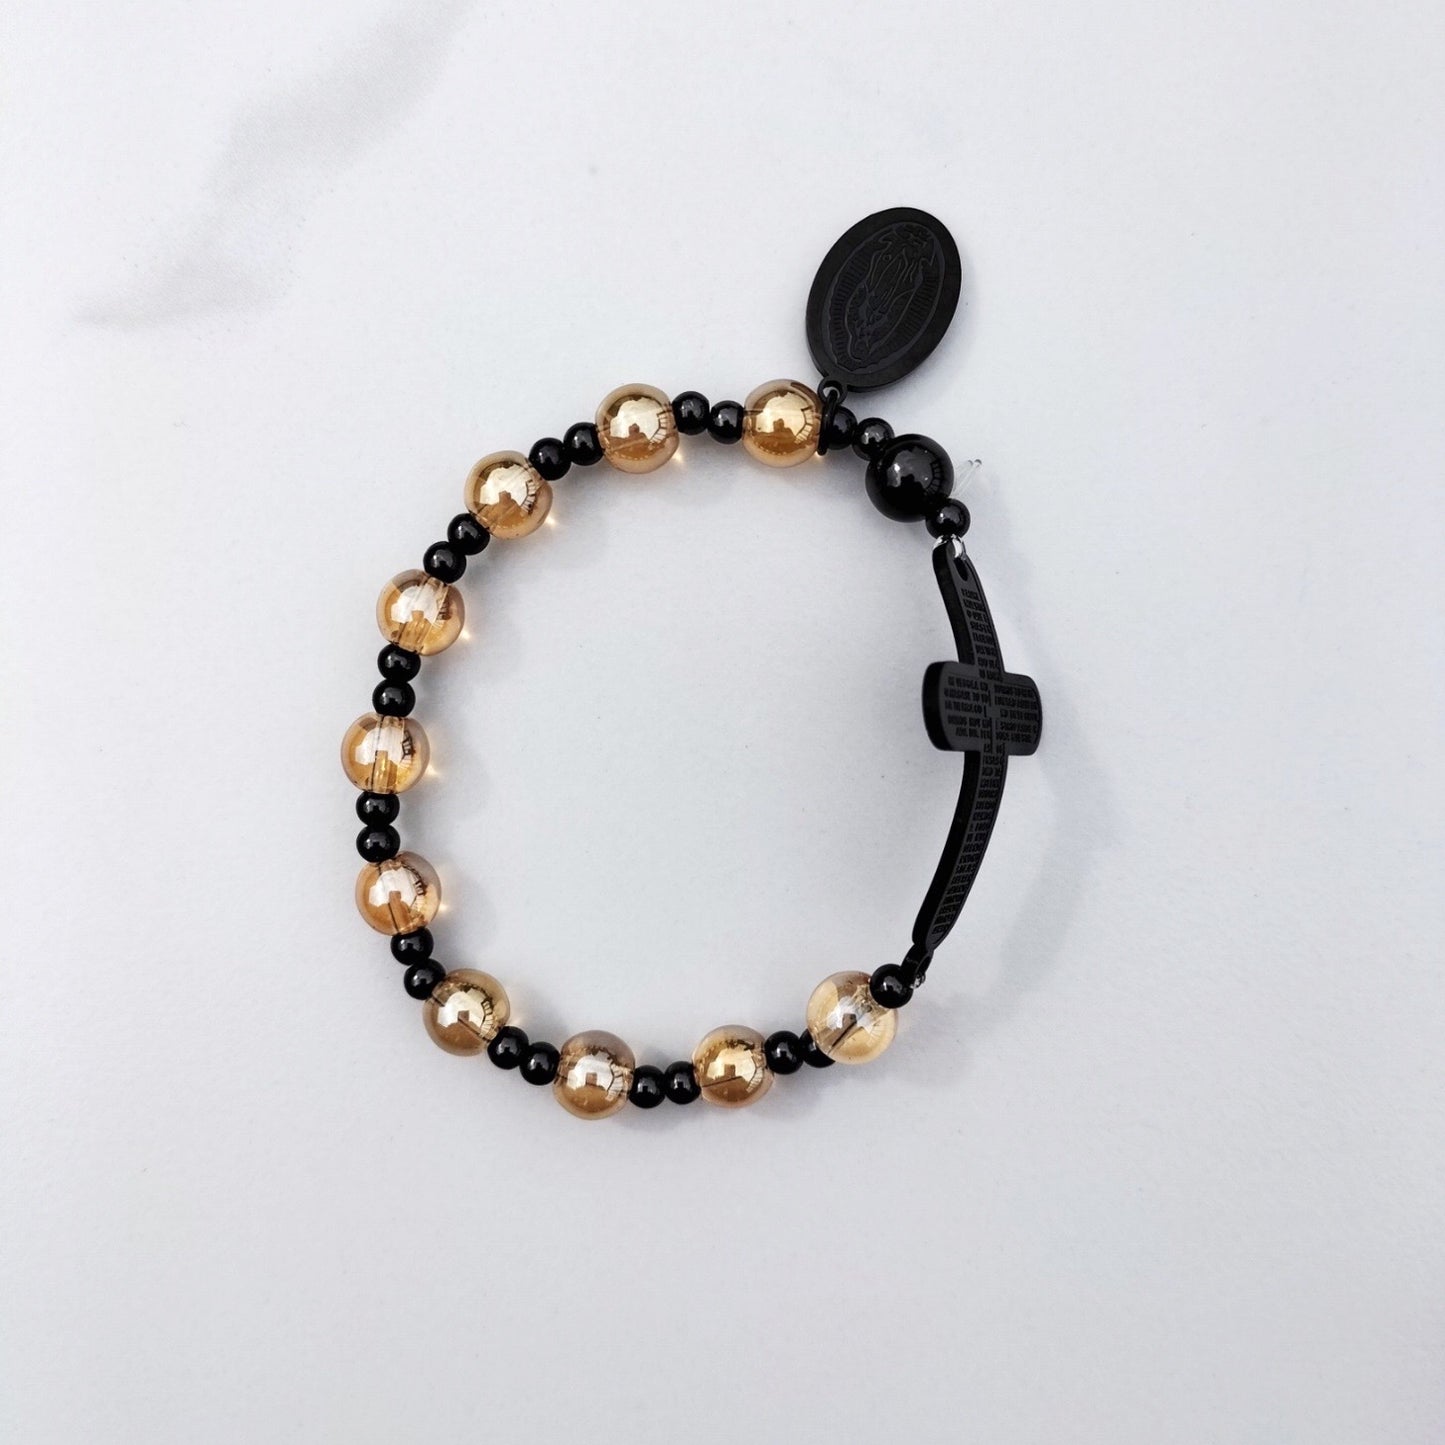 Bracelet: Stainless Steel and Gold Bead